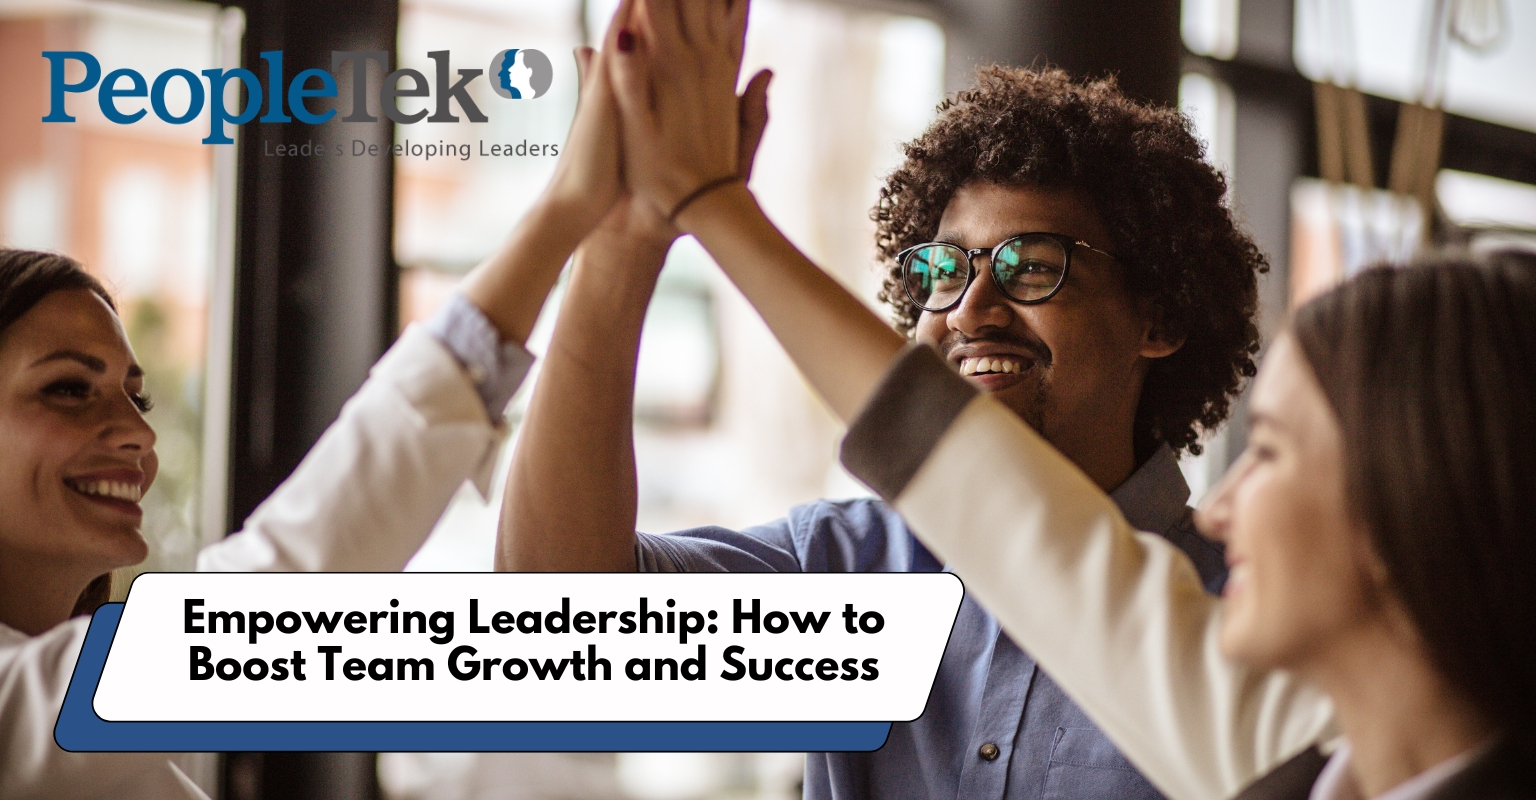 Empowering Leadership: How to Boost Team Growth and Success